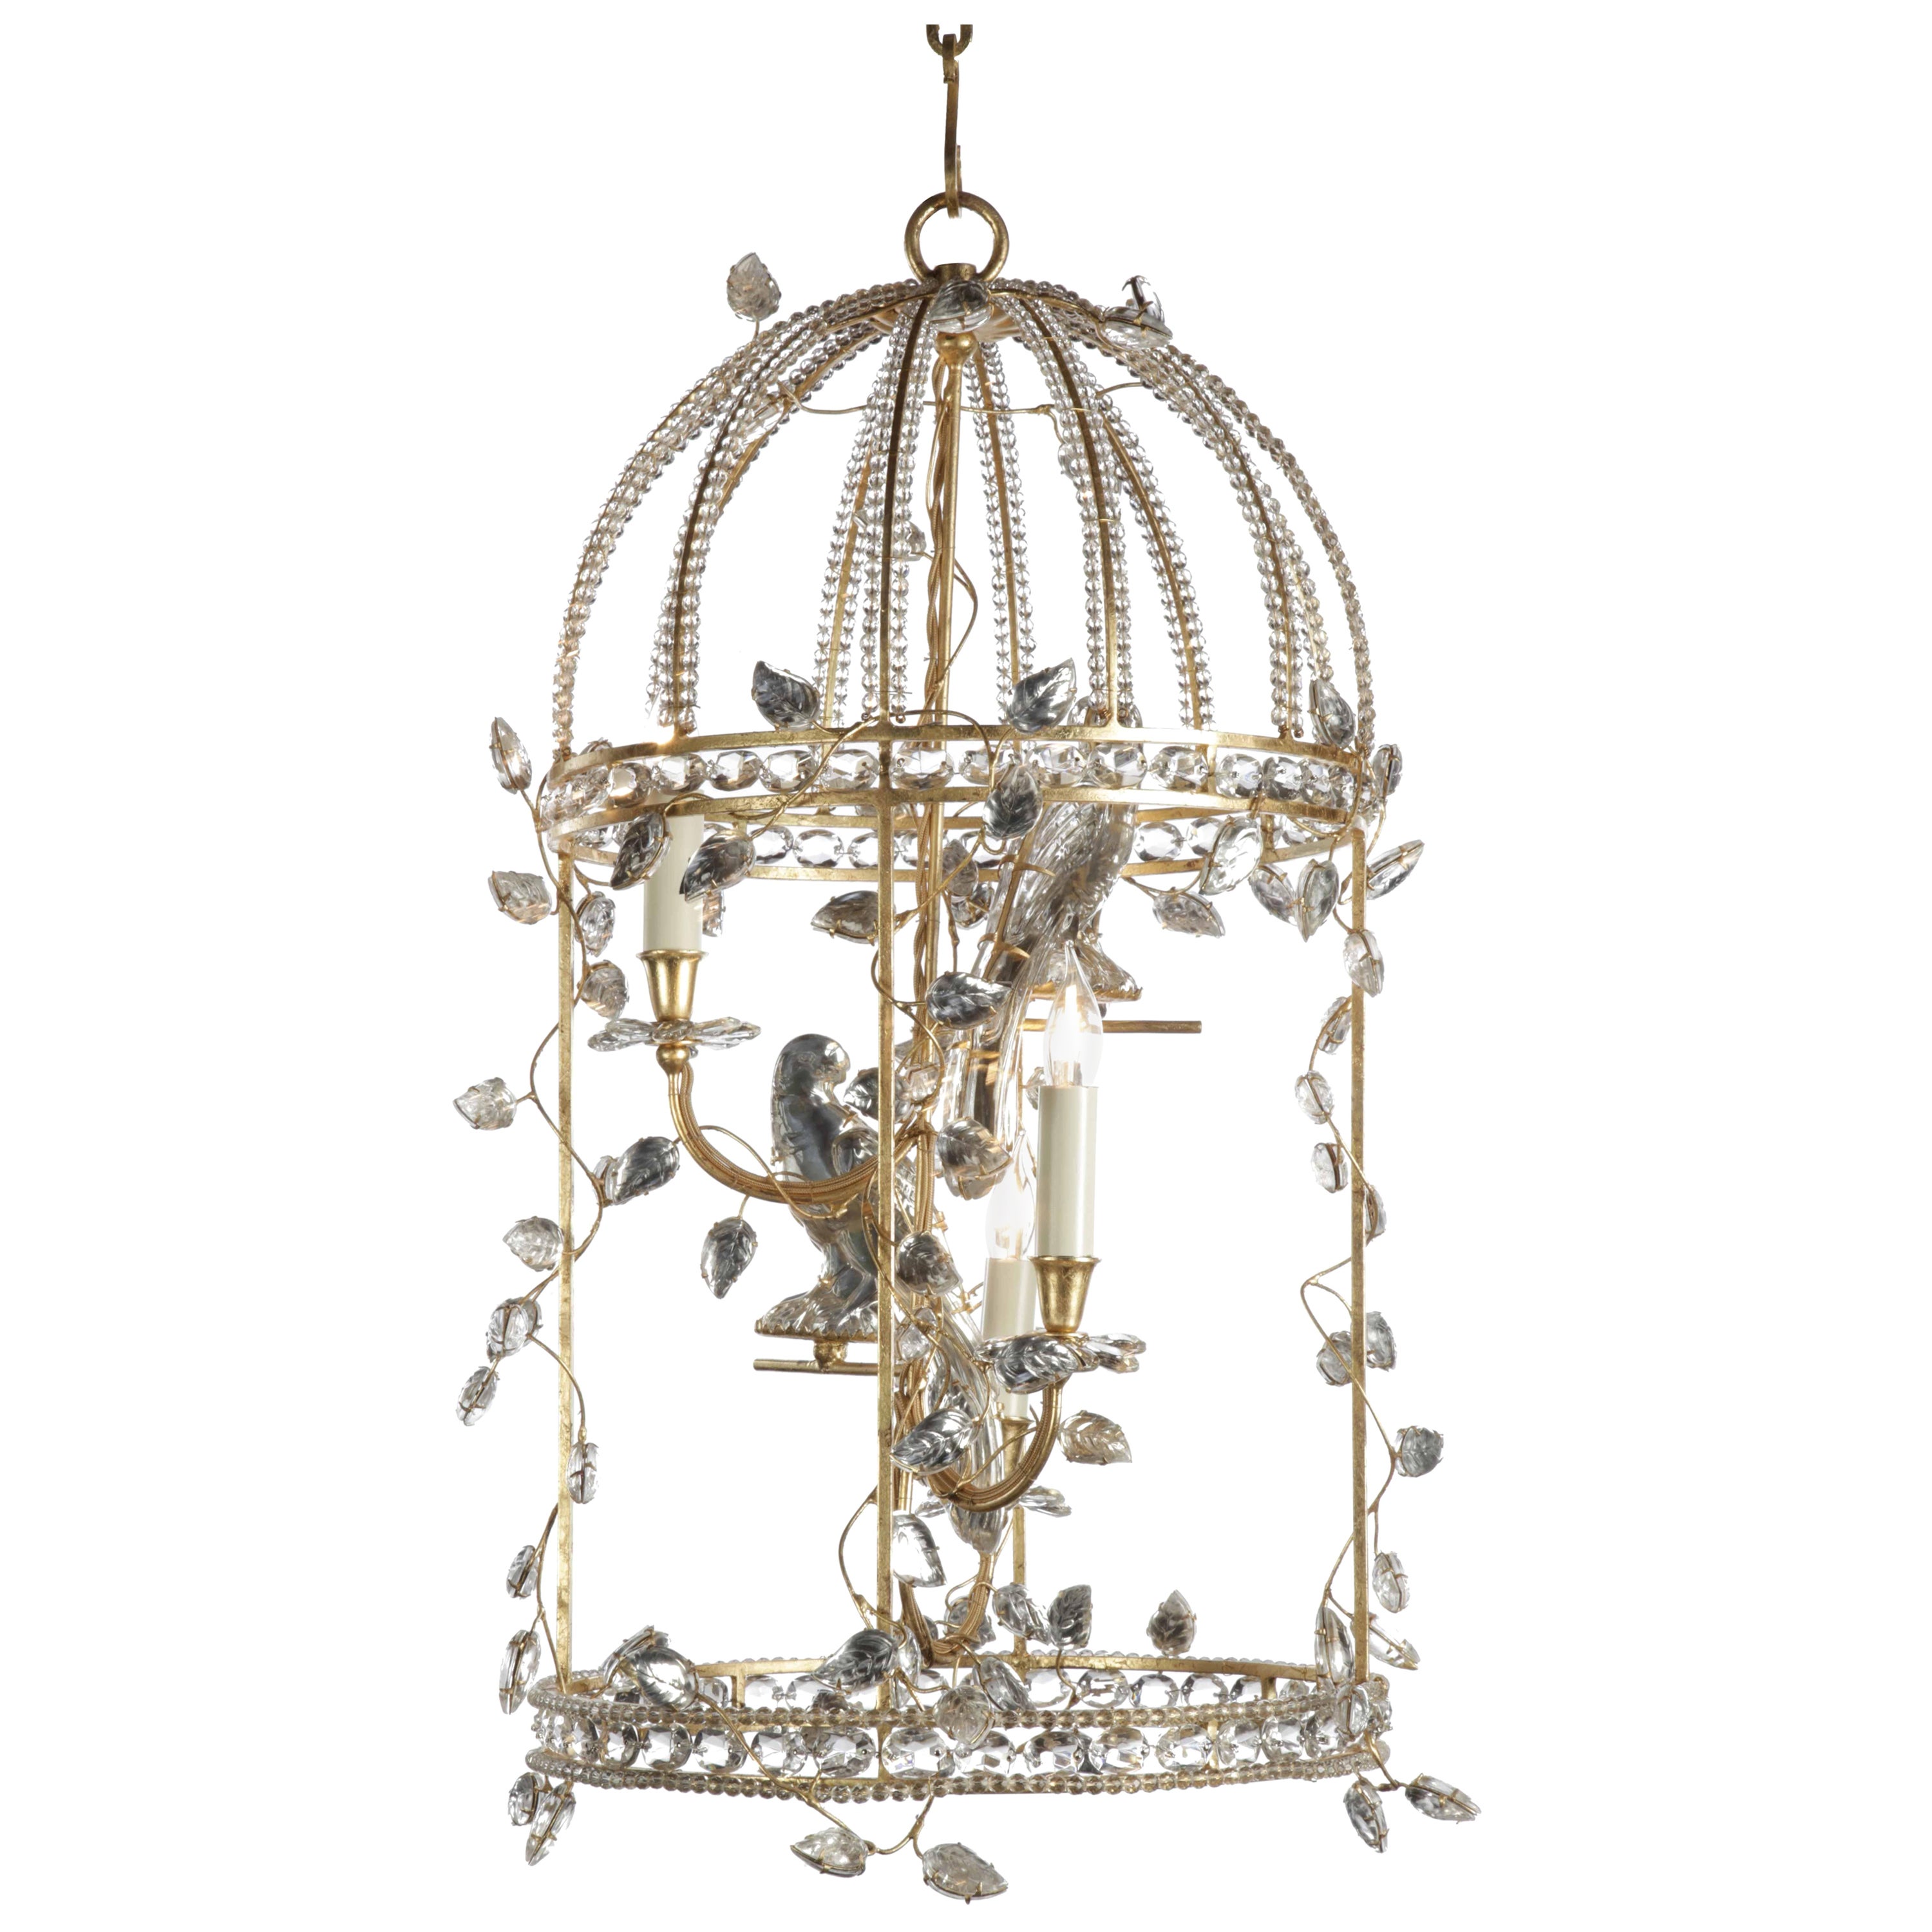 Certified Maison Bagues Chandelier, 3 Lights Iron & Crystal #20031 For Sale